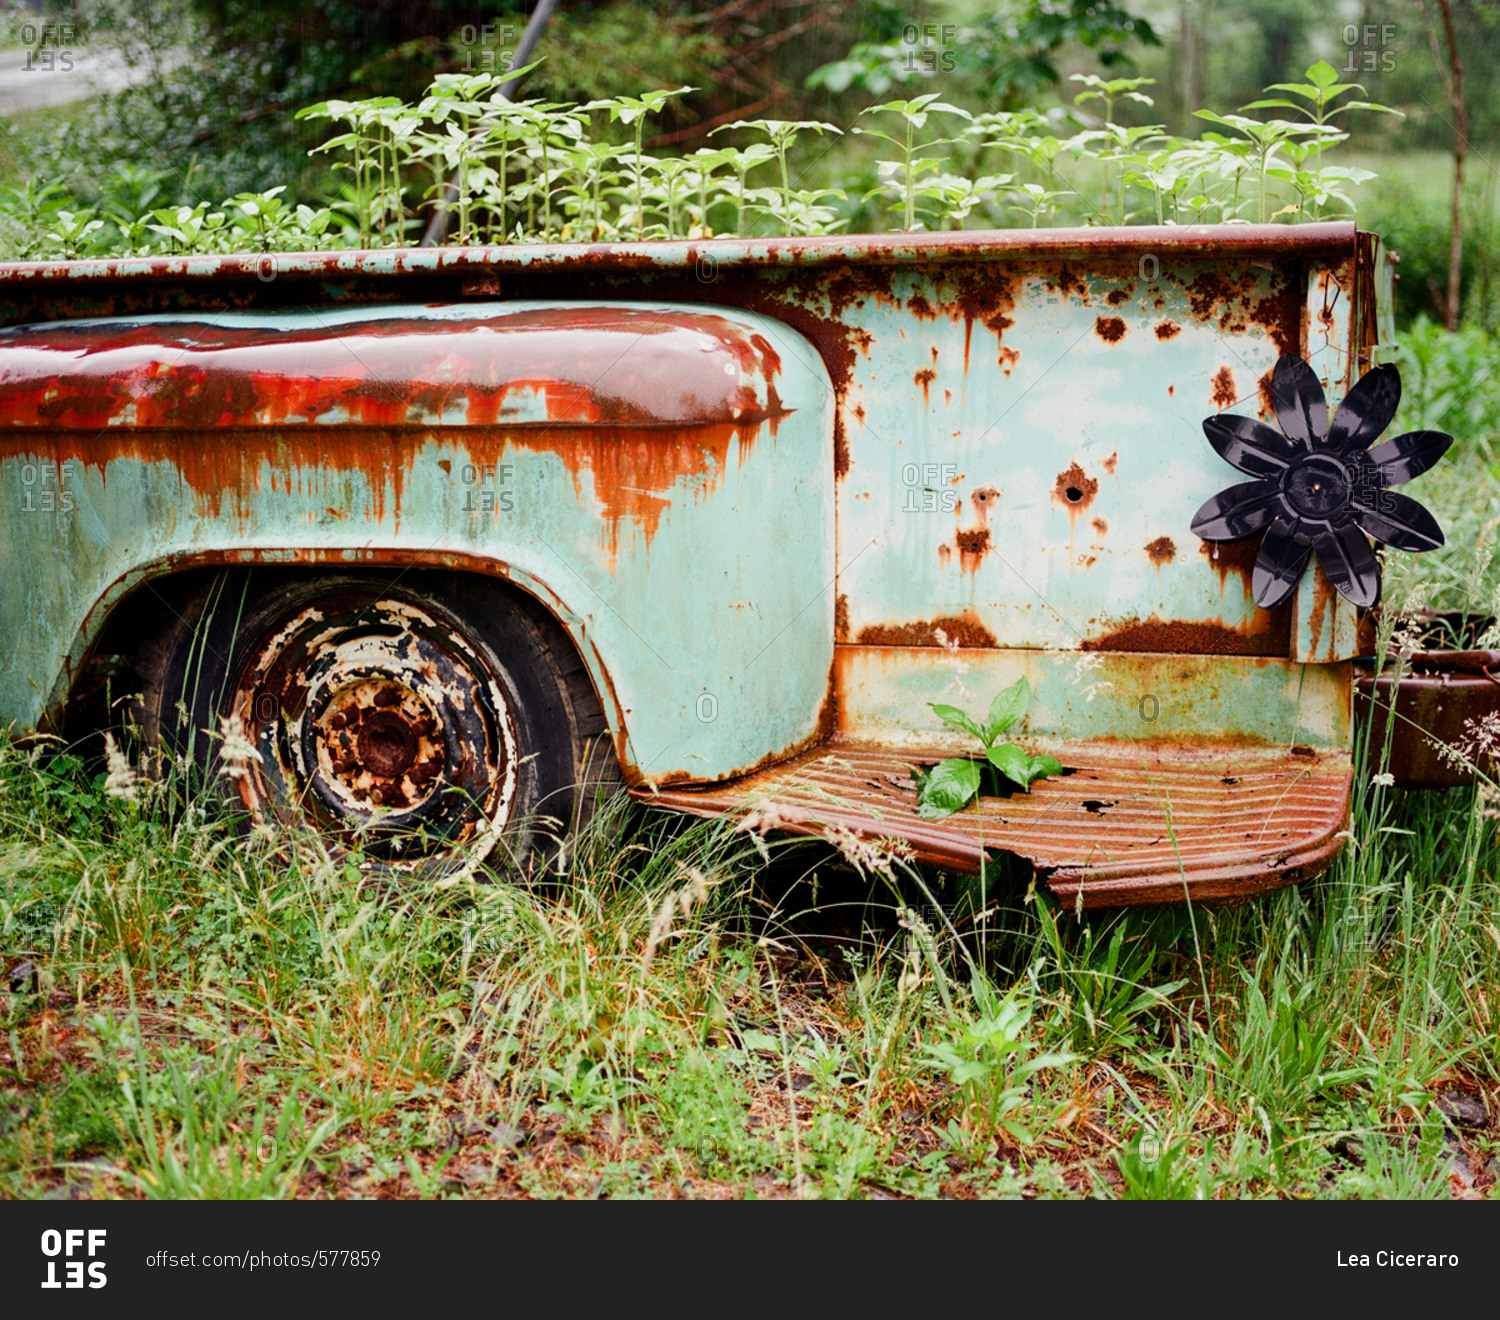 Abandoned rusted trailer overgrown with weeds